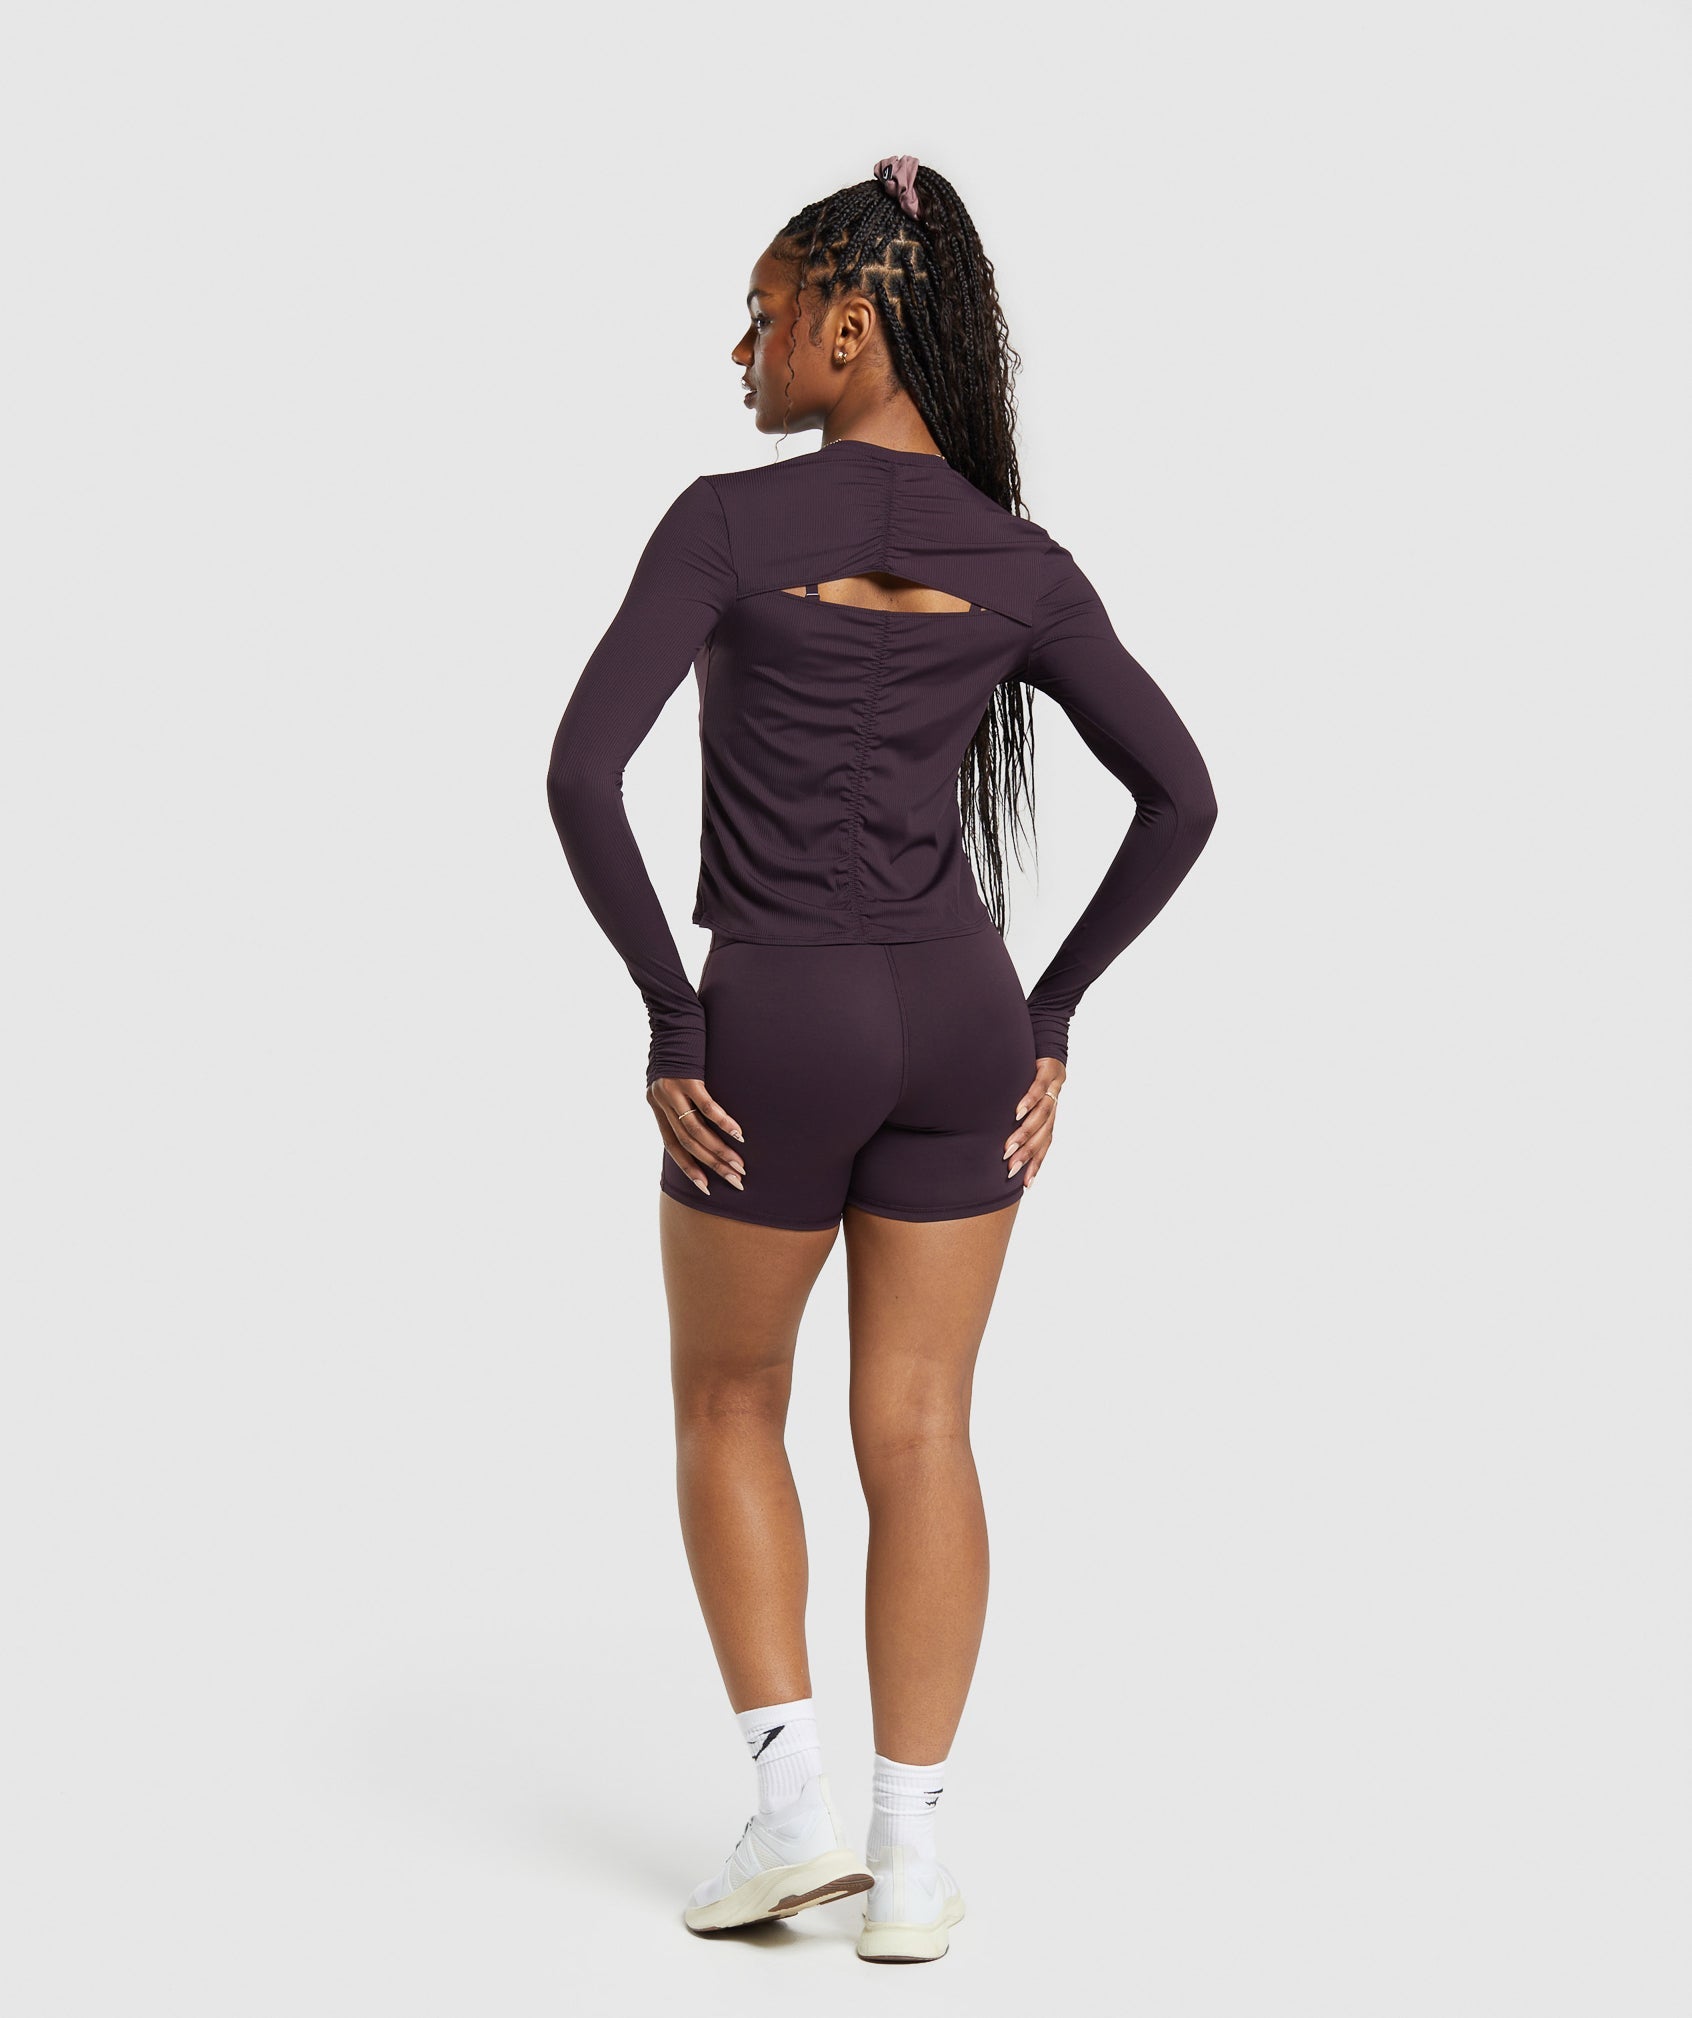 Elevate Long Sleeve Ruched Top in Plum Brown - view 4